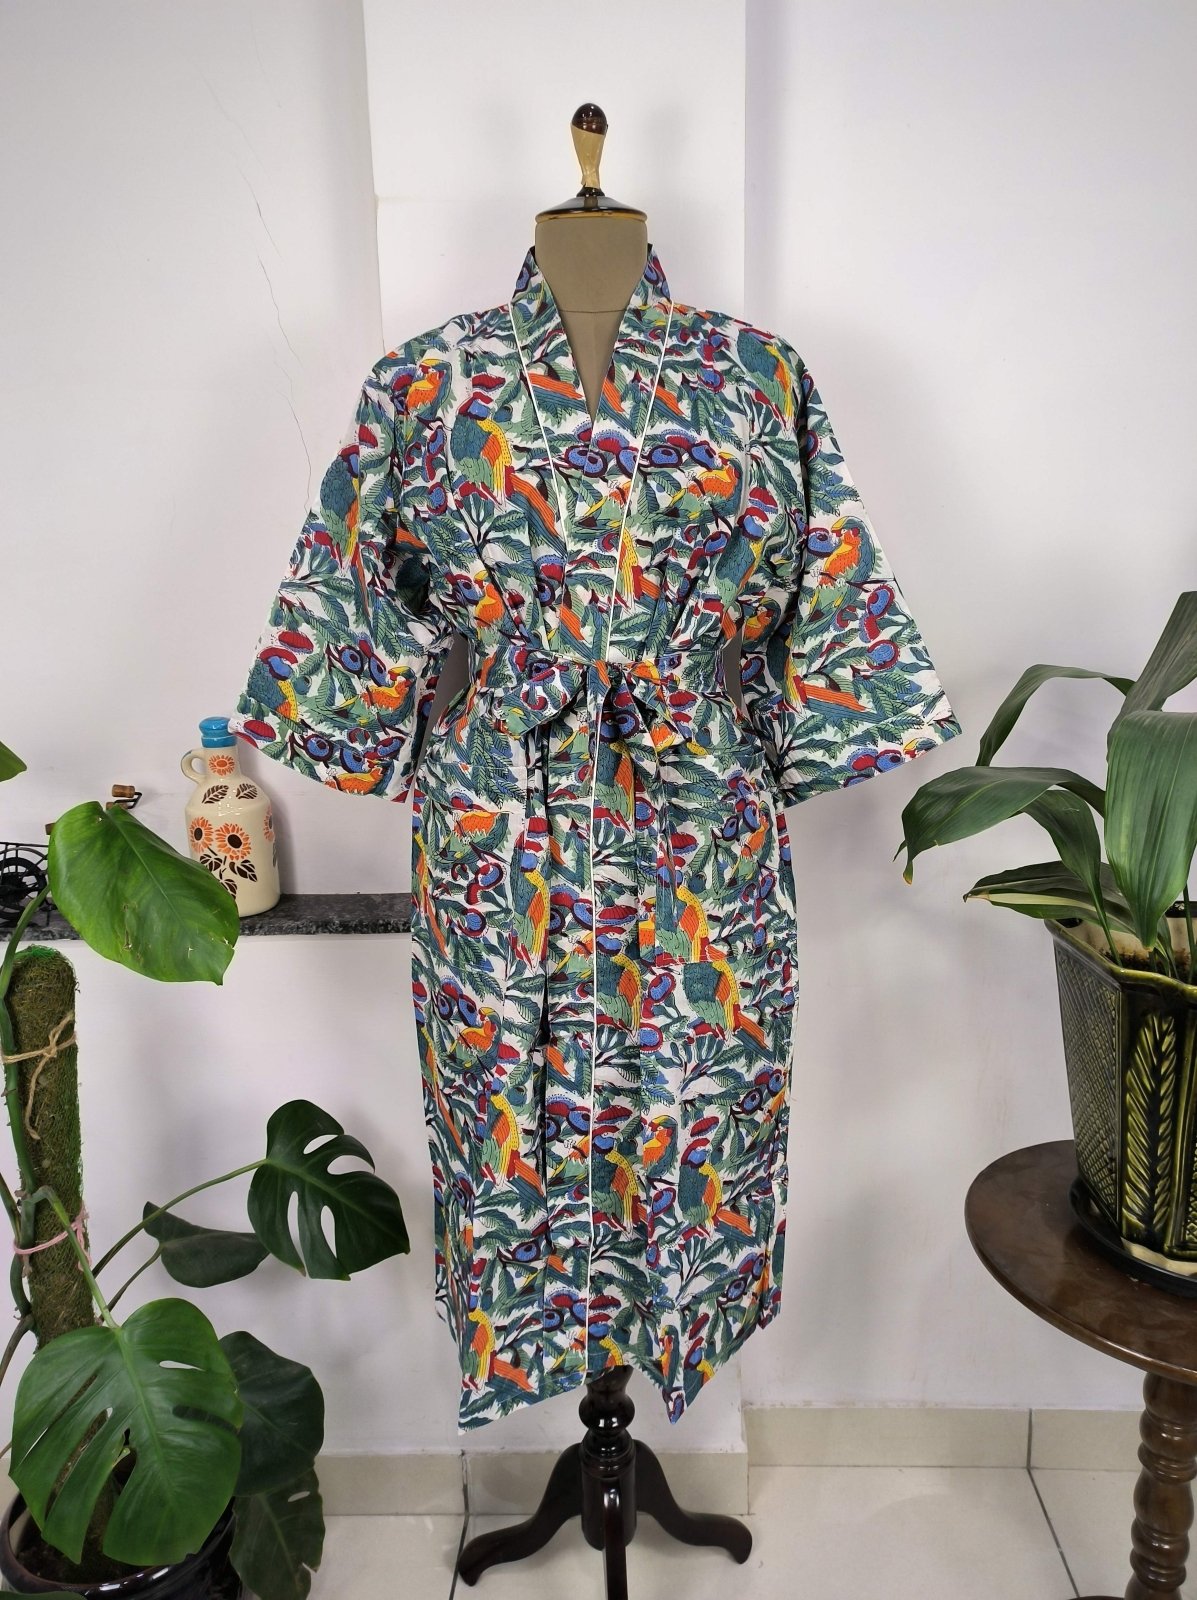 Boho House Robe Indian Handprinted Cotton Kimono Parrot Bird Print | Perfect for Summer Luxury Beach Holidays Yacht Cover Up Stunning Dress - The Eastern Loom